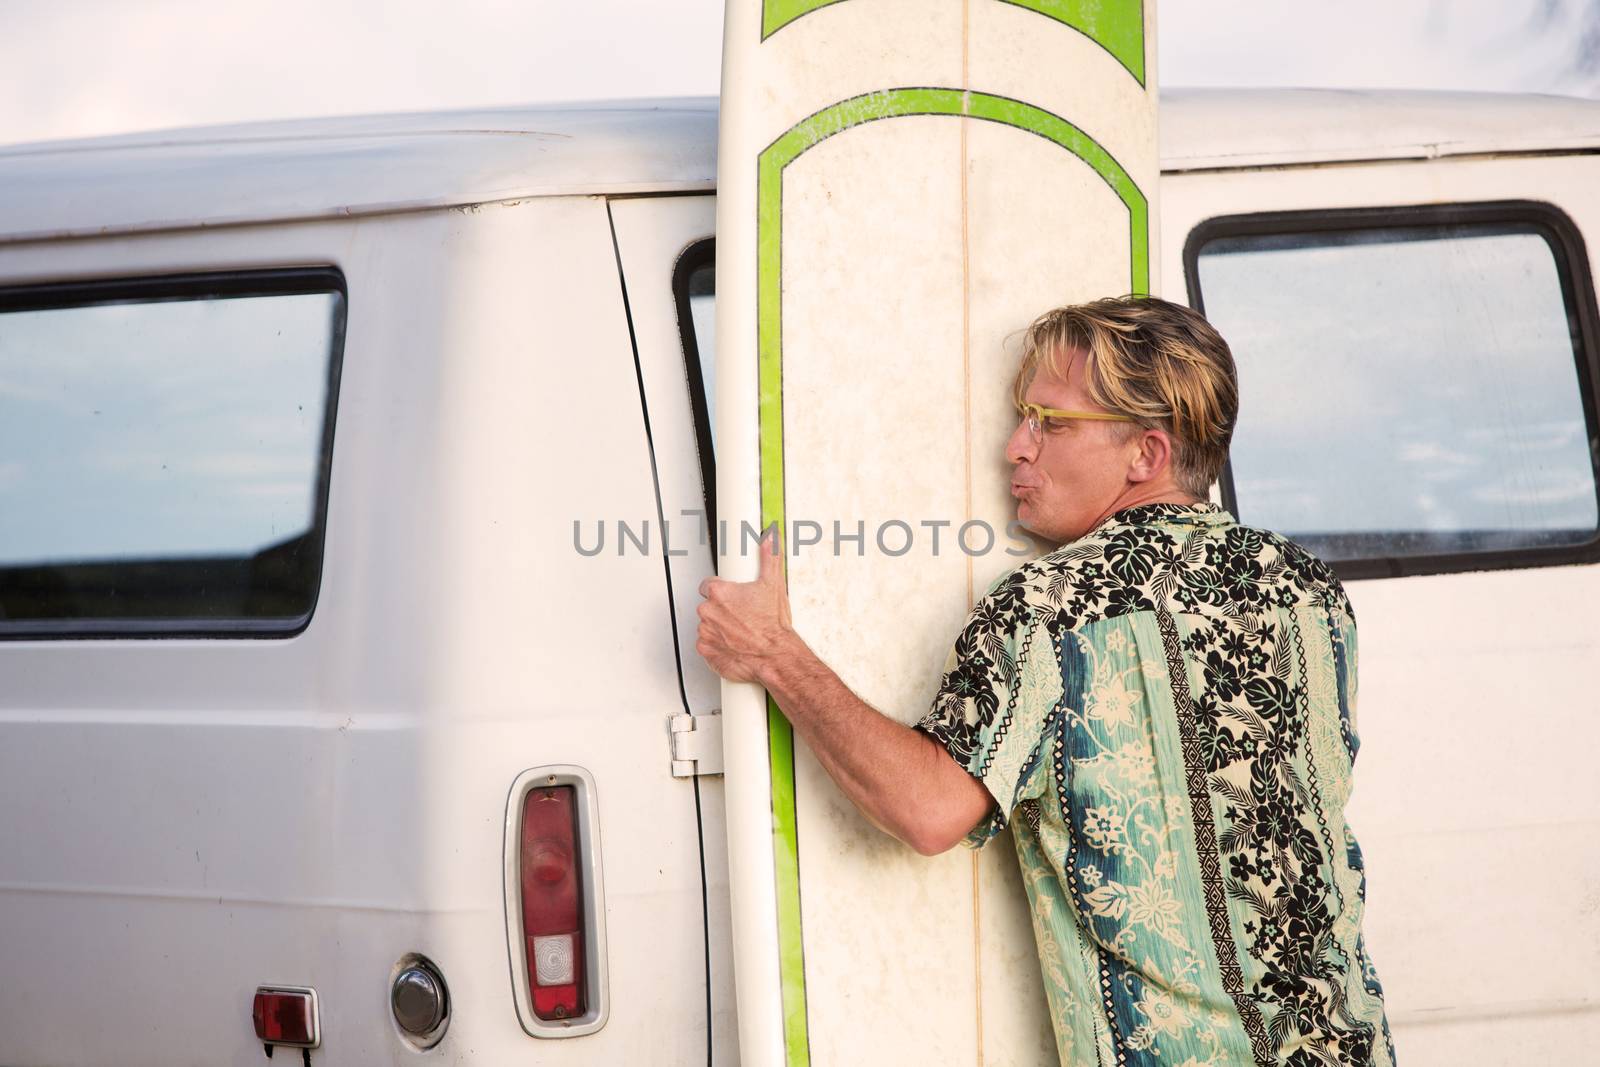 One middle aged man lifting heavy surfboard